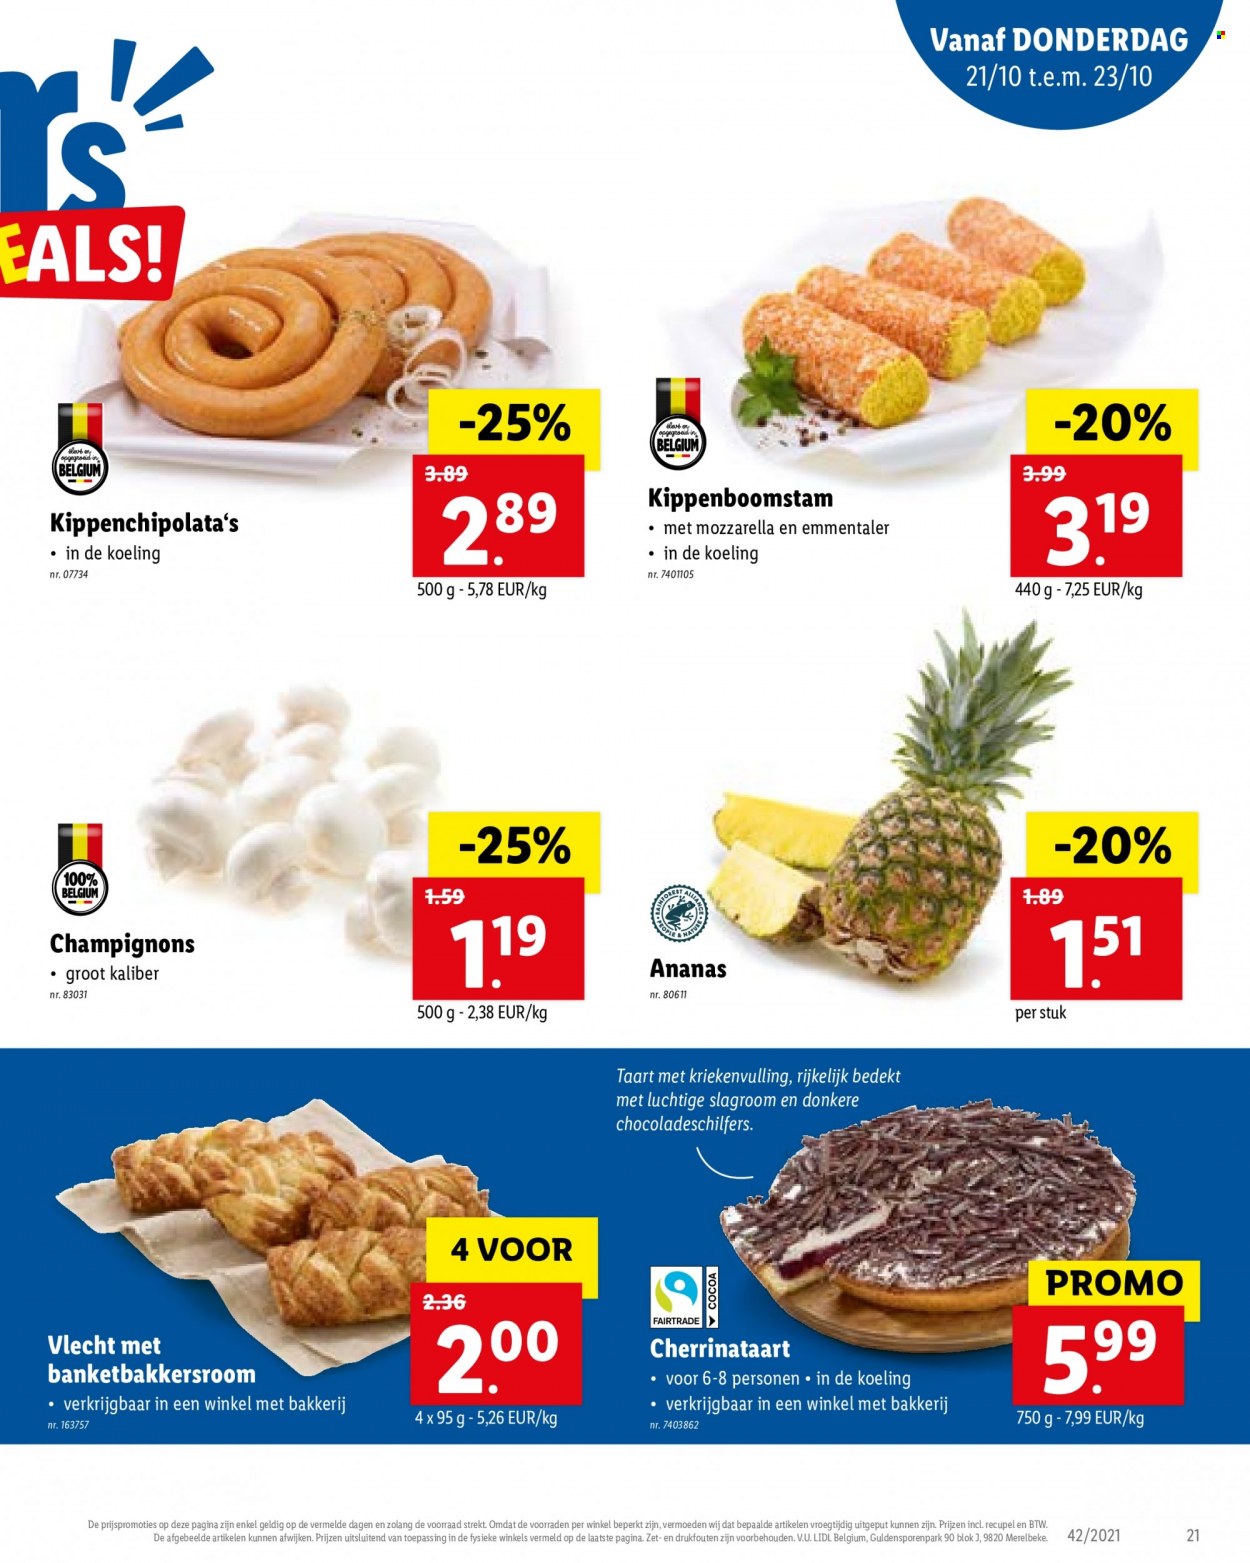 Catalogue Lidl - 18.10.2021 - 23.10.2021. Page 21.